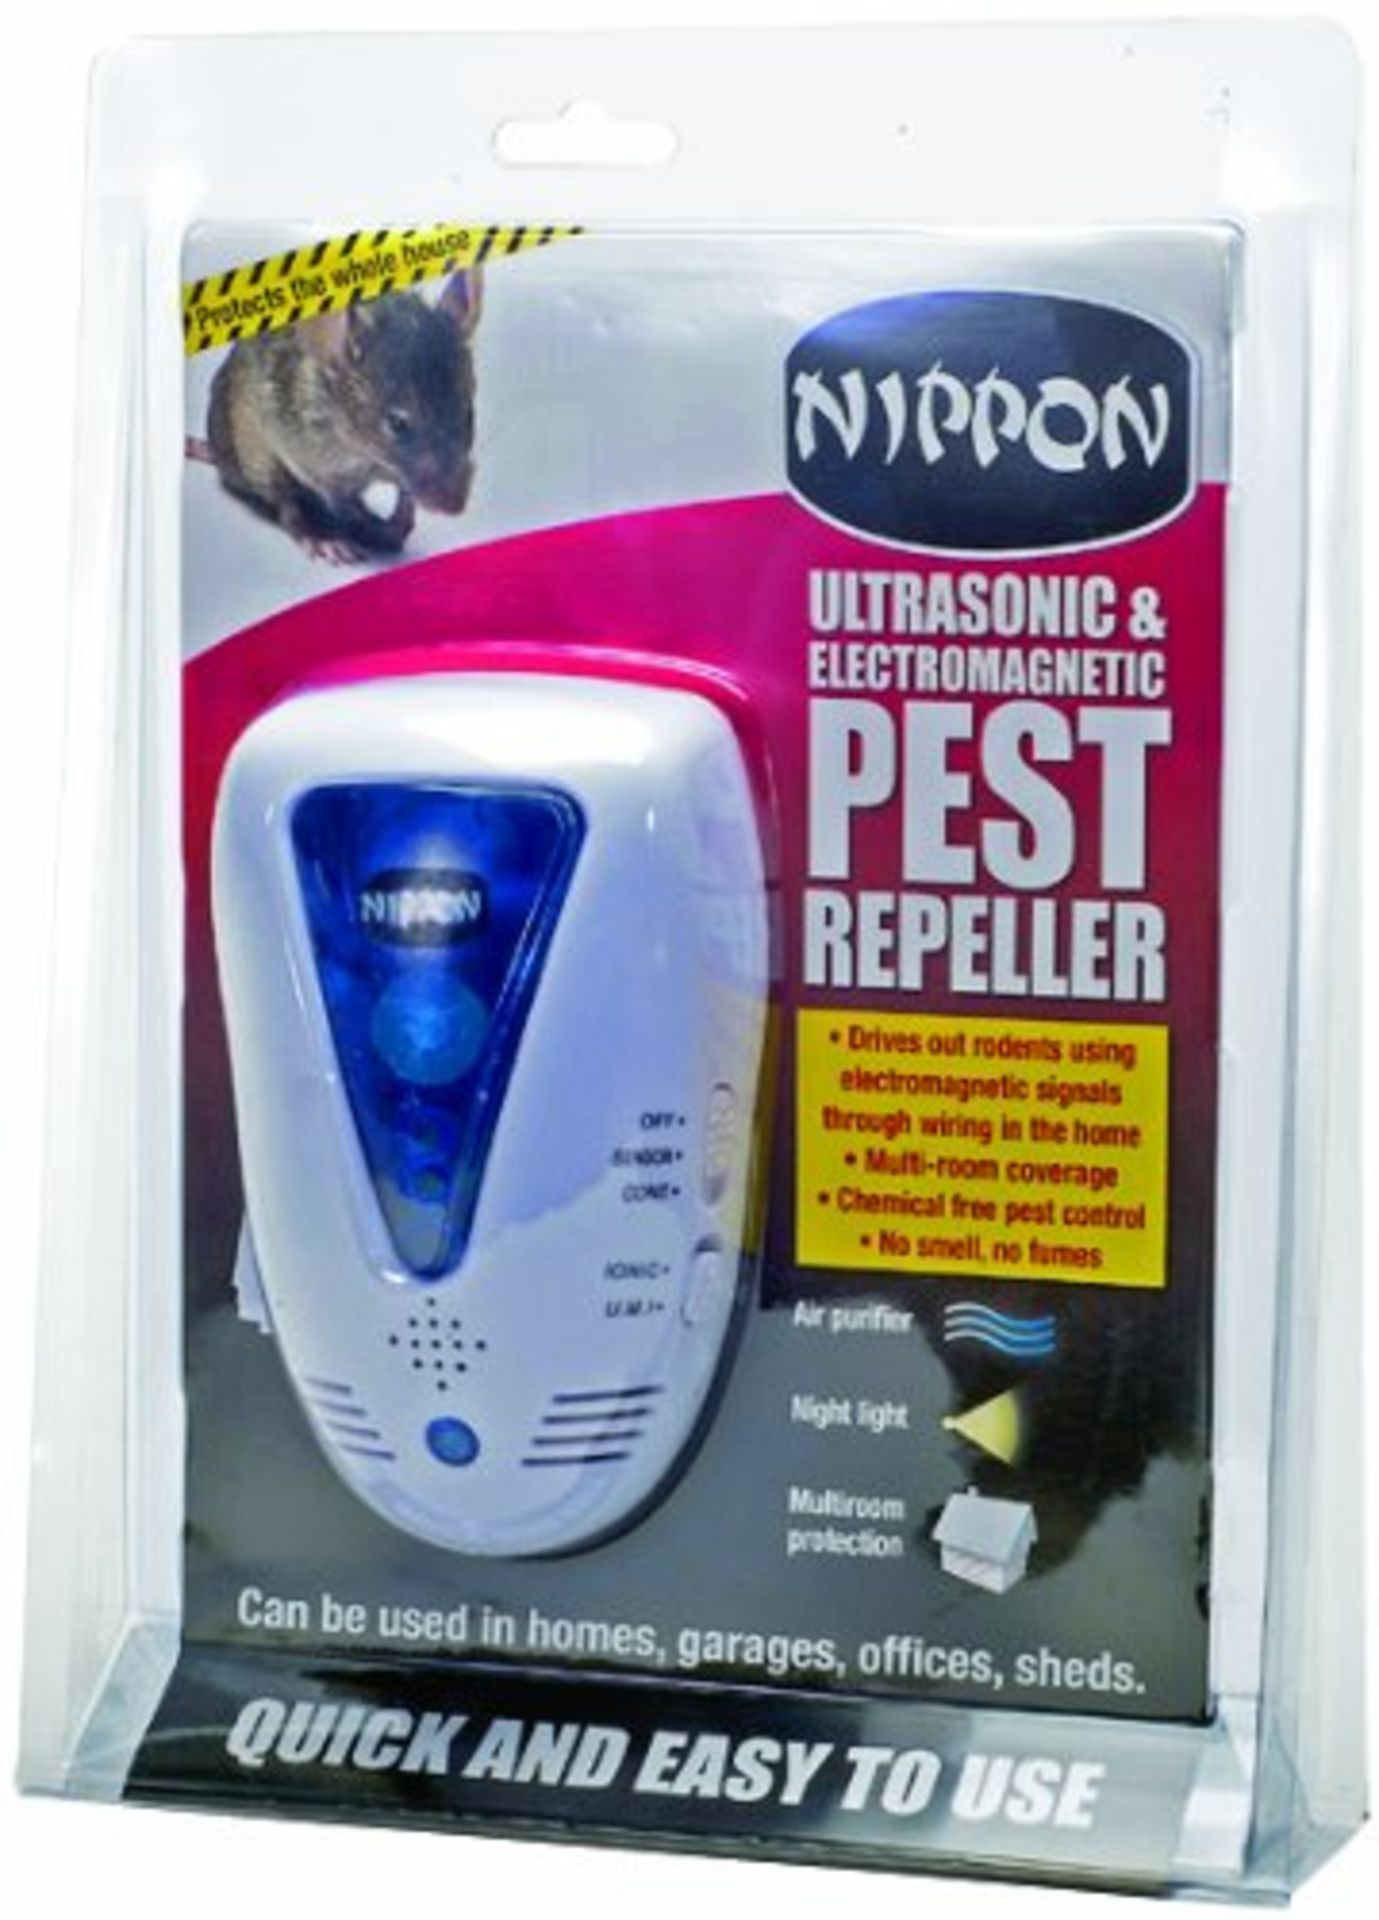 V *TRADE QTY* Brand New Nippon Ultrasonic & Electromagnetic Pest Repeller ISP £26.99 (Ebay) X 3 YOUR